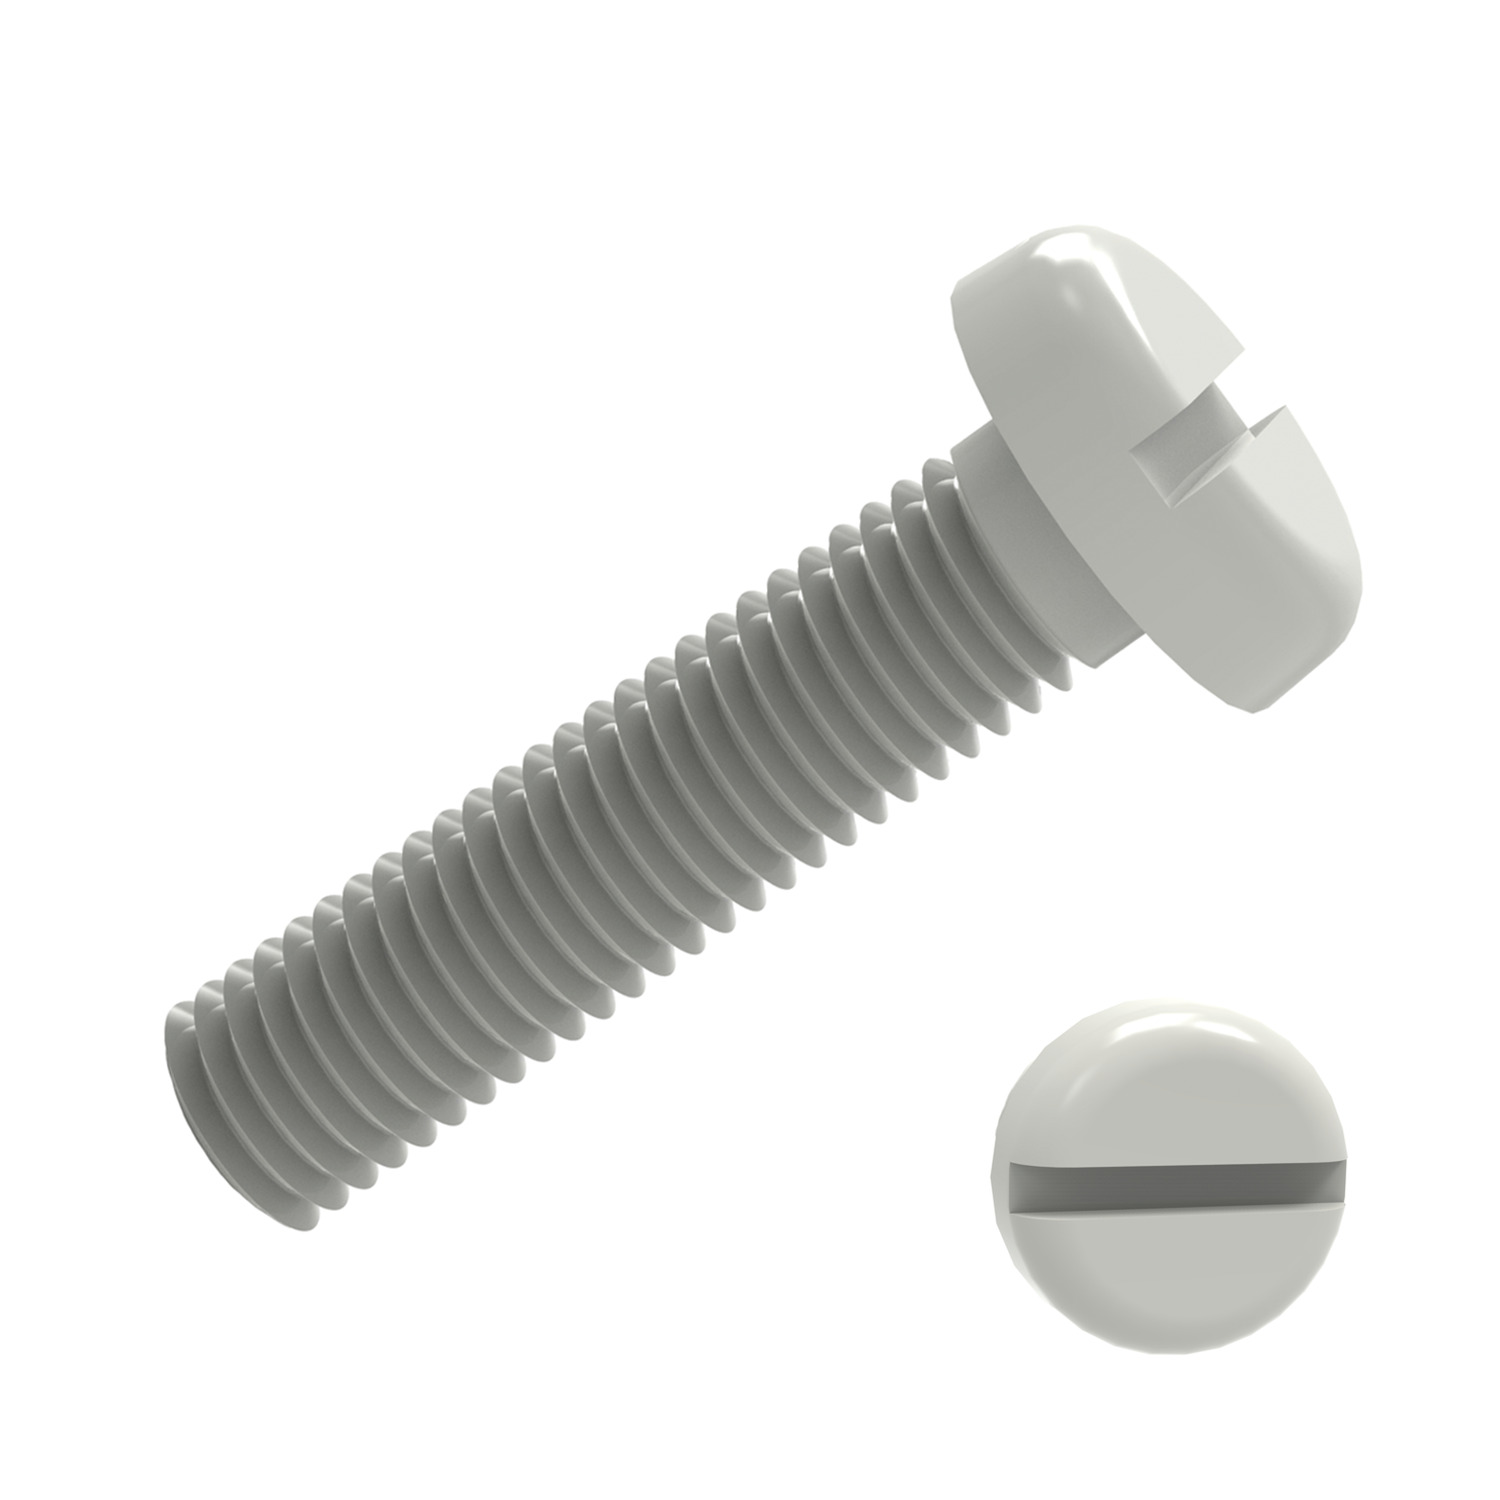 Nylon Slot Pan Head Screws To DIN 85, ISO 1580. Threaded within 2,5 x pitch of head.